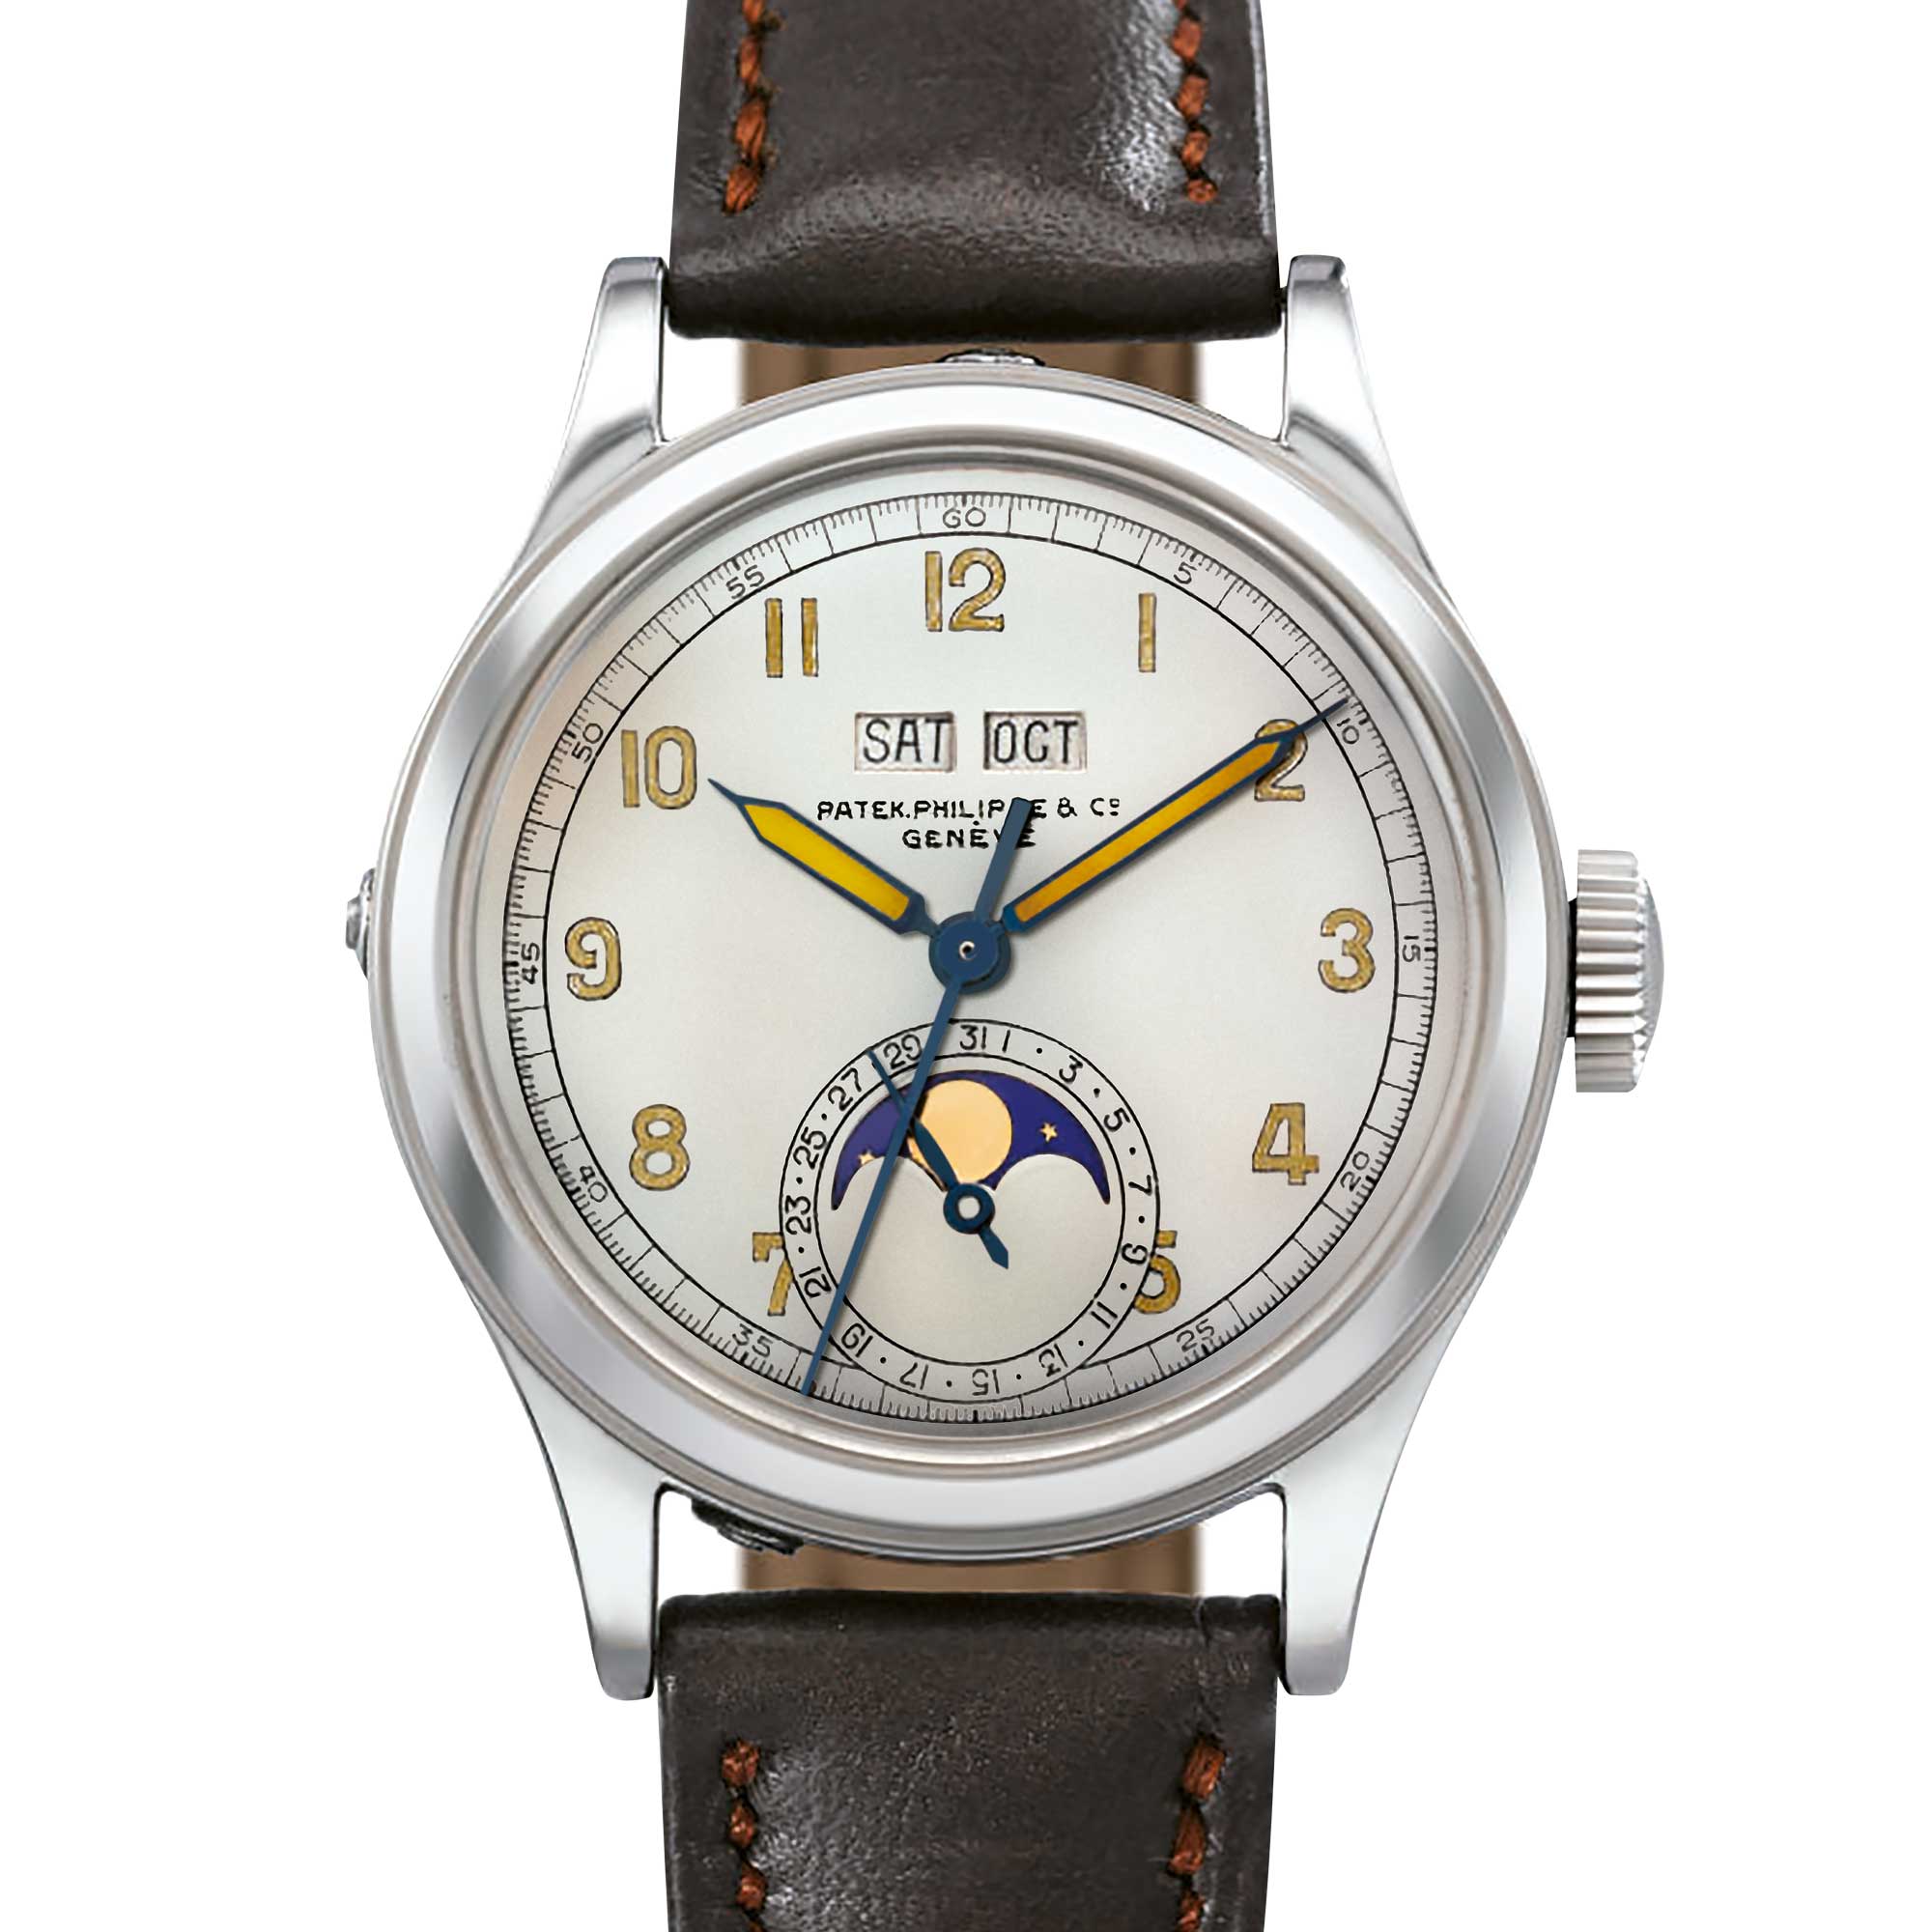 Ref. 1591 was a waterproof watch, reportedly created in 1944 for a maharaja who enjoyed the sports lifestyle